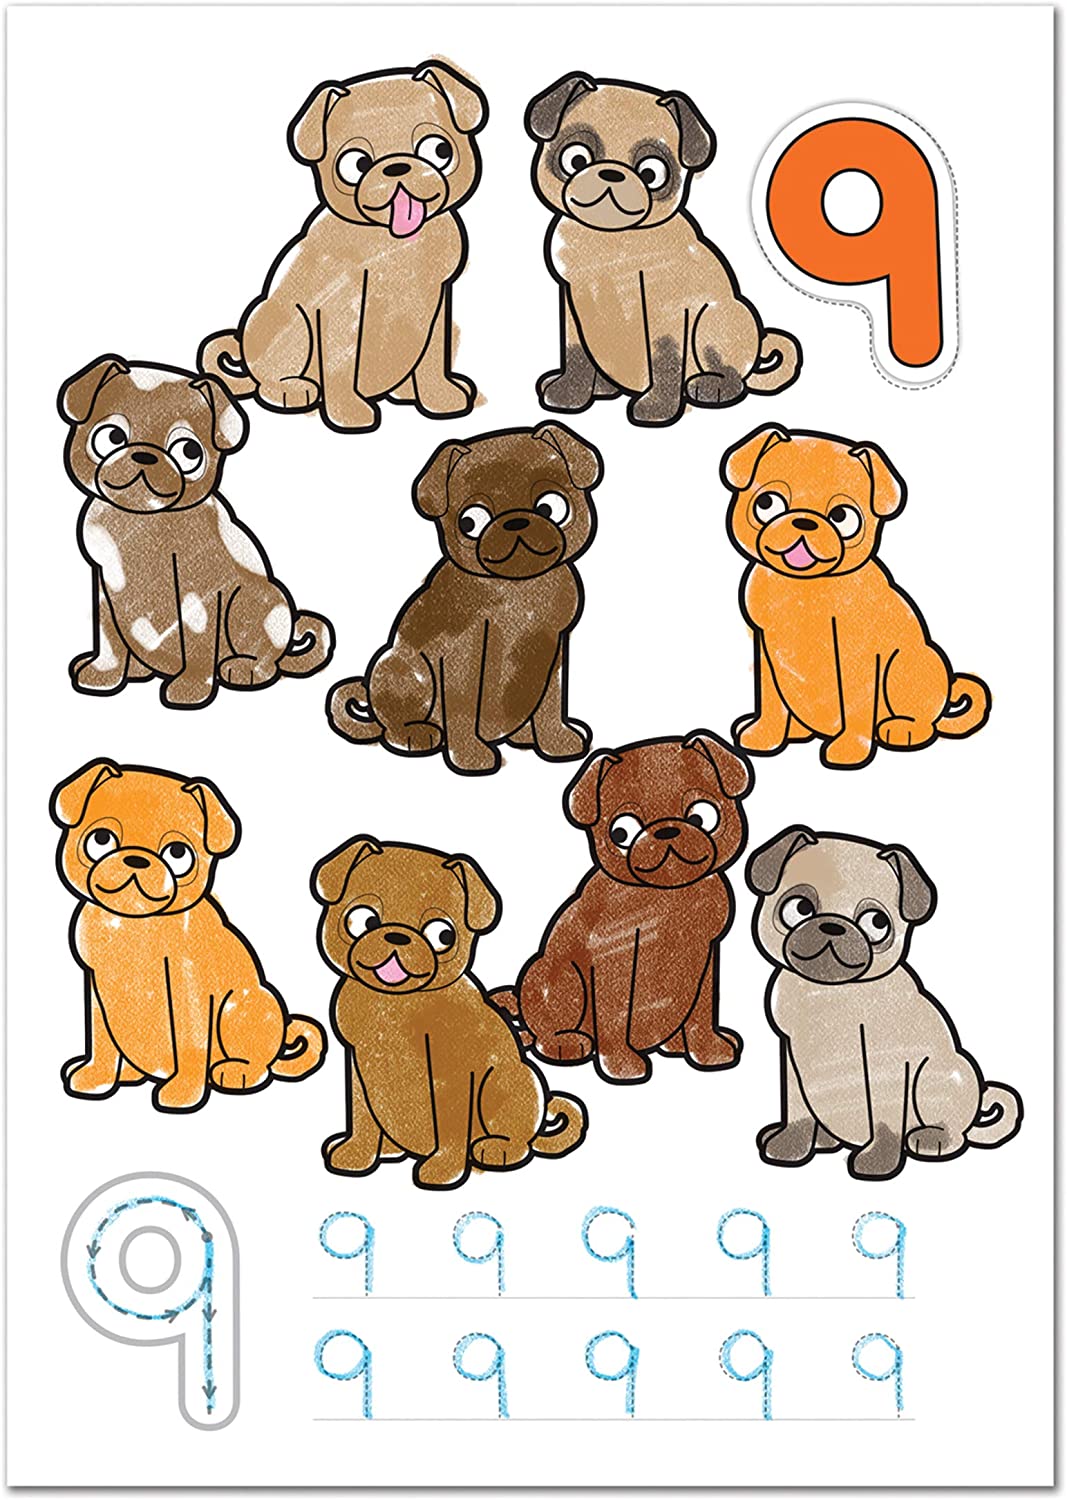 ORCHARD 1-20 NUMBERS STICKER COL BOOK